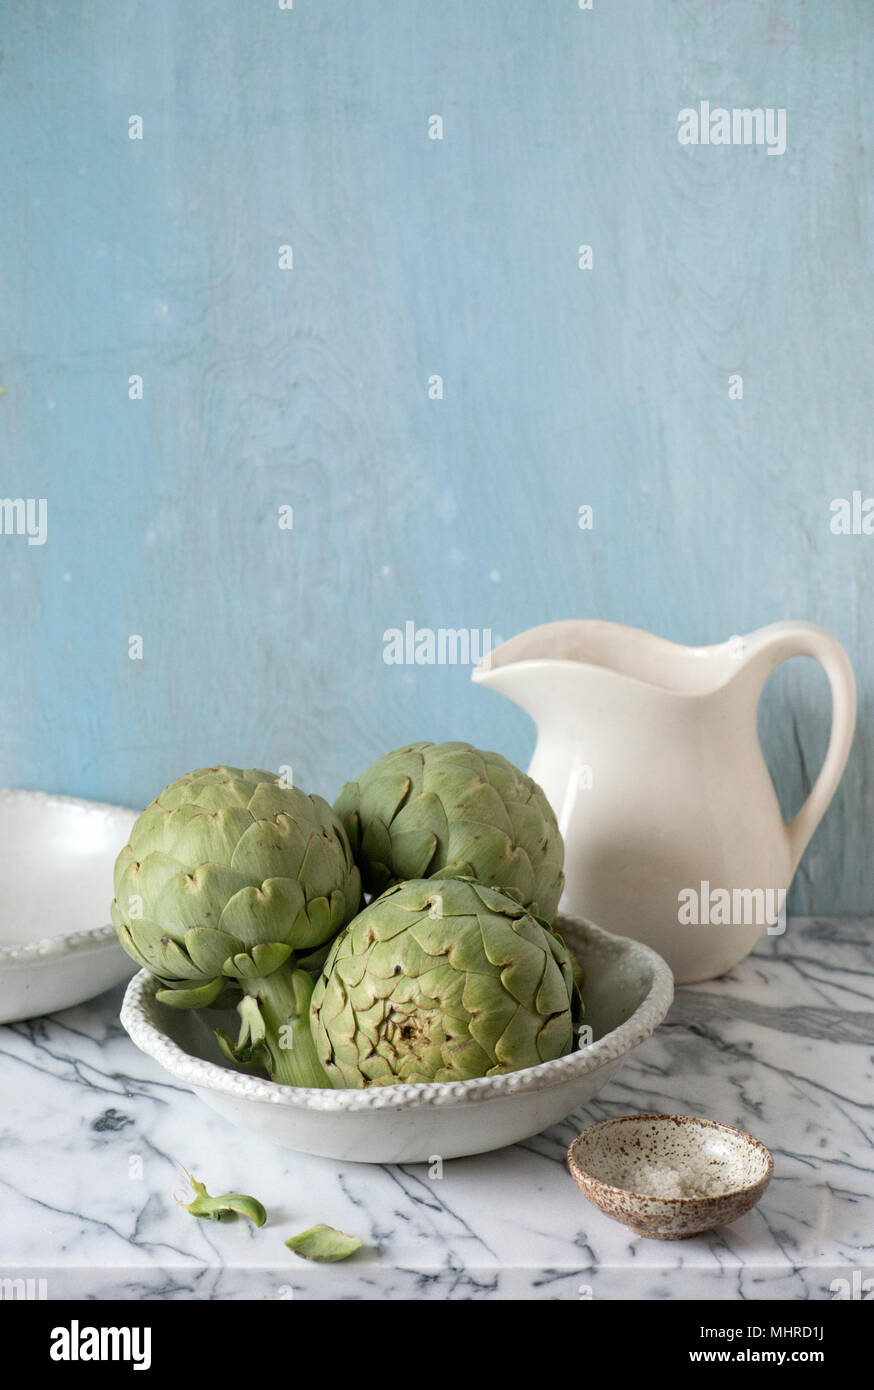 three artichokes ready in a white ceramic bowl with pitcher. Stock Photo